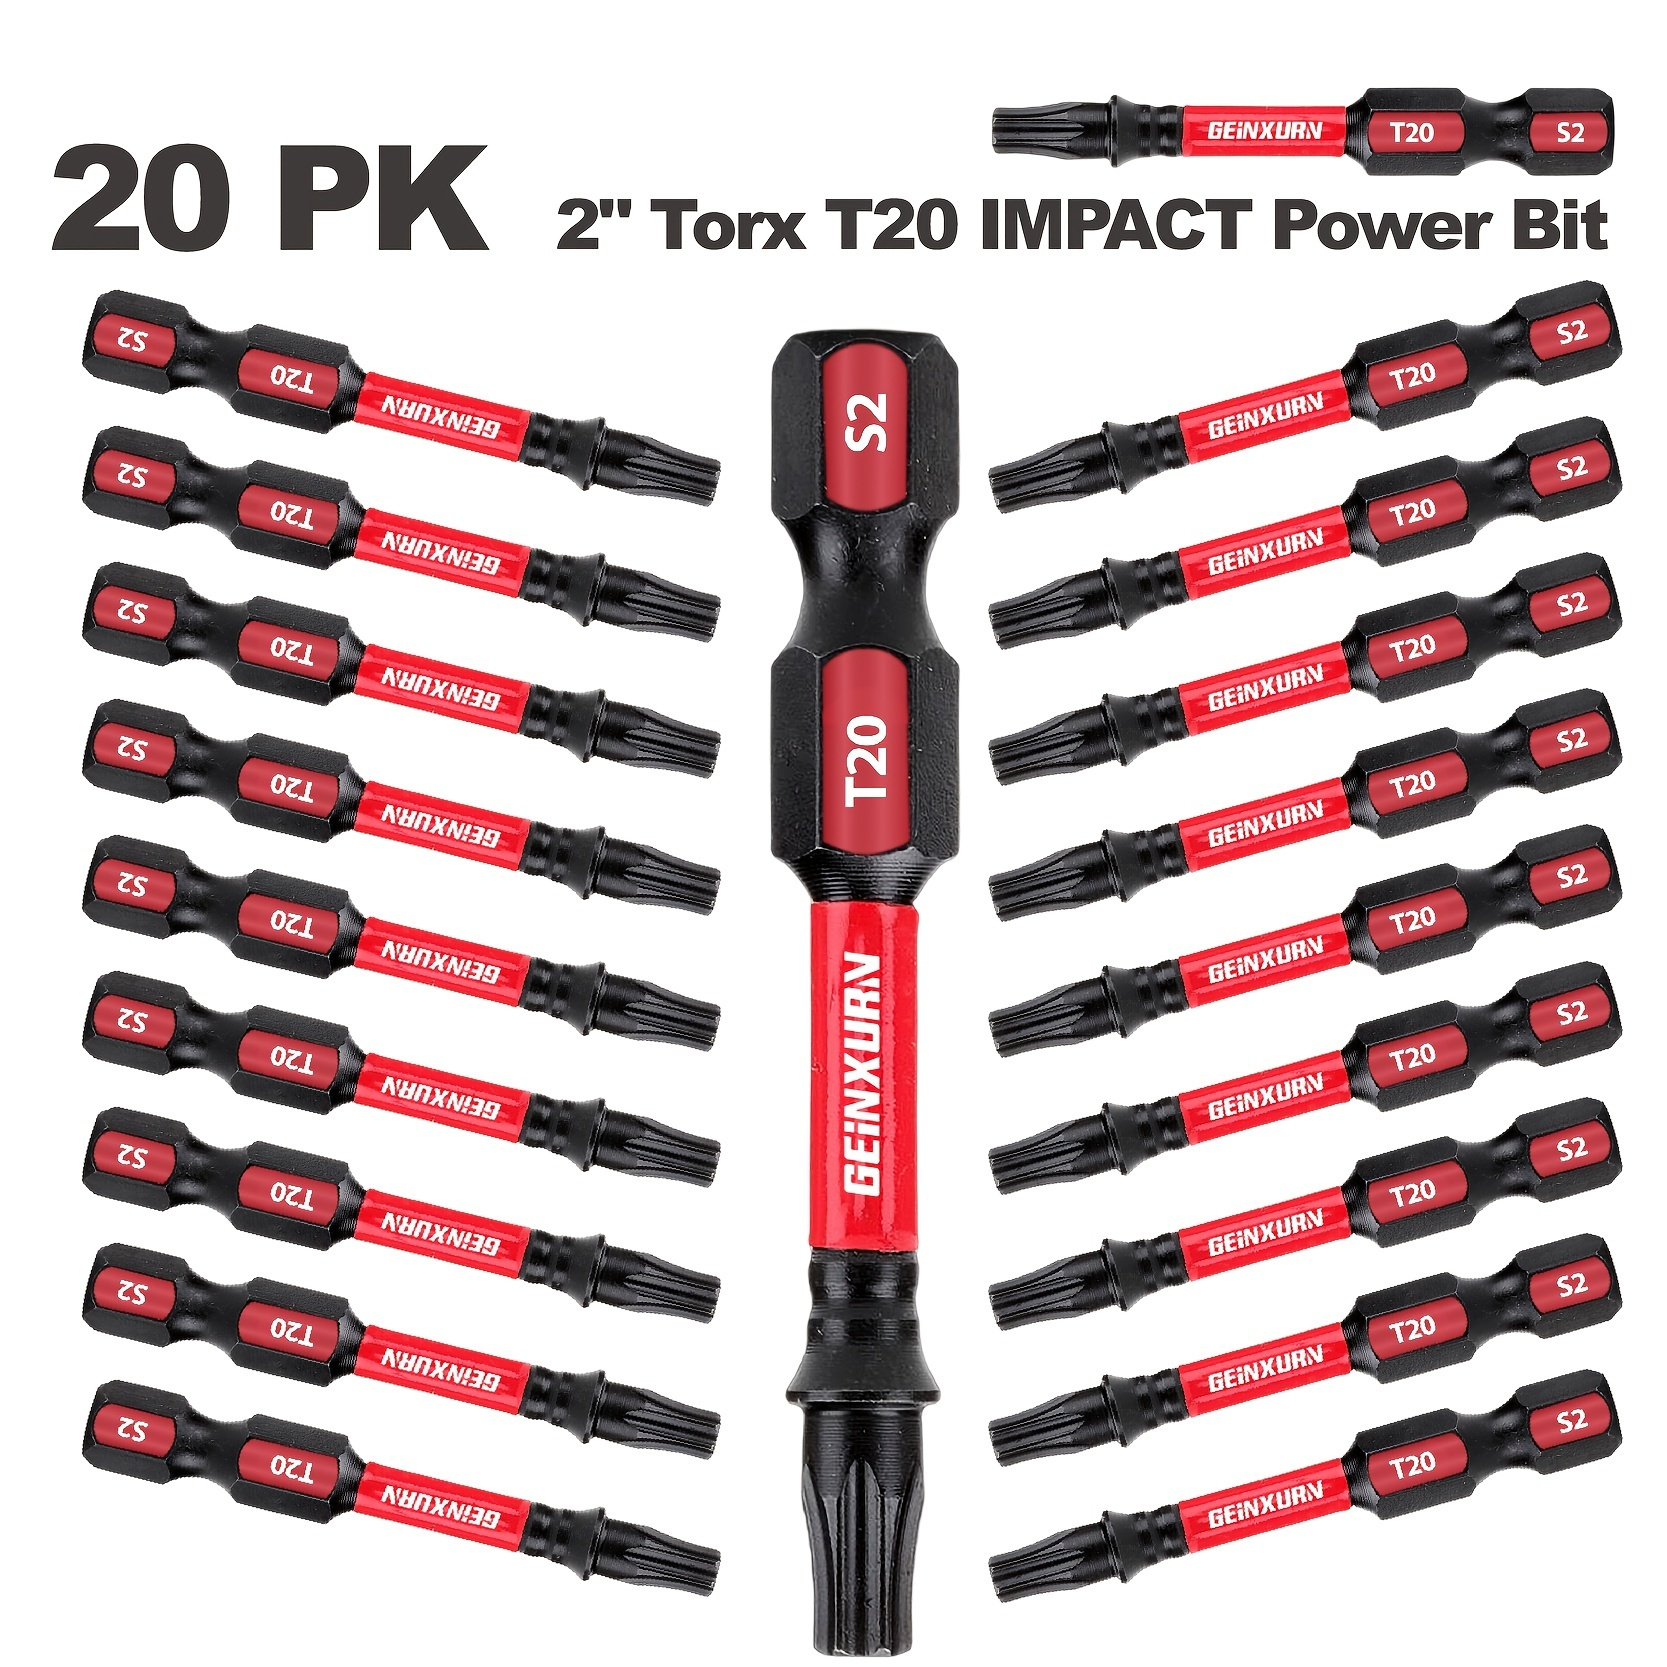 

50mm/2 Inch Torx T20 Impact Screwdriver Bit - Perfect For Plastic, Wood, And Metal Projects!